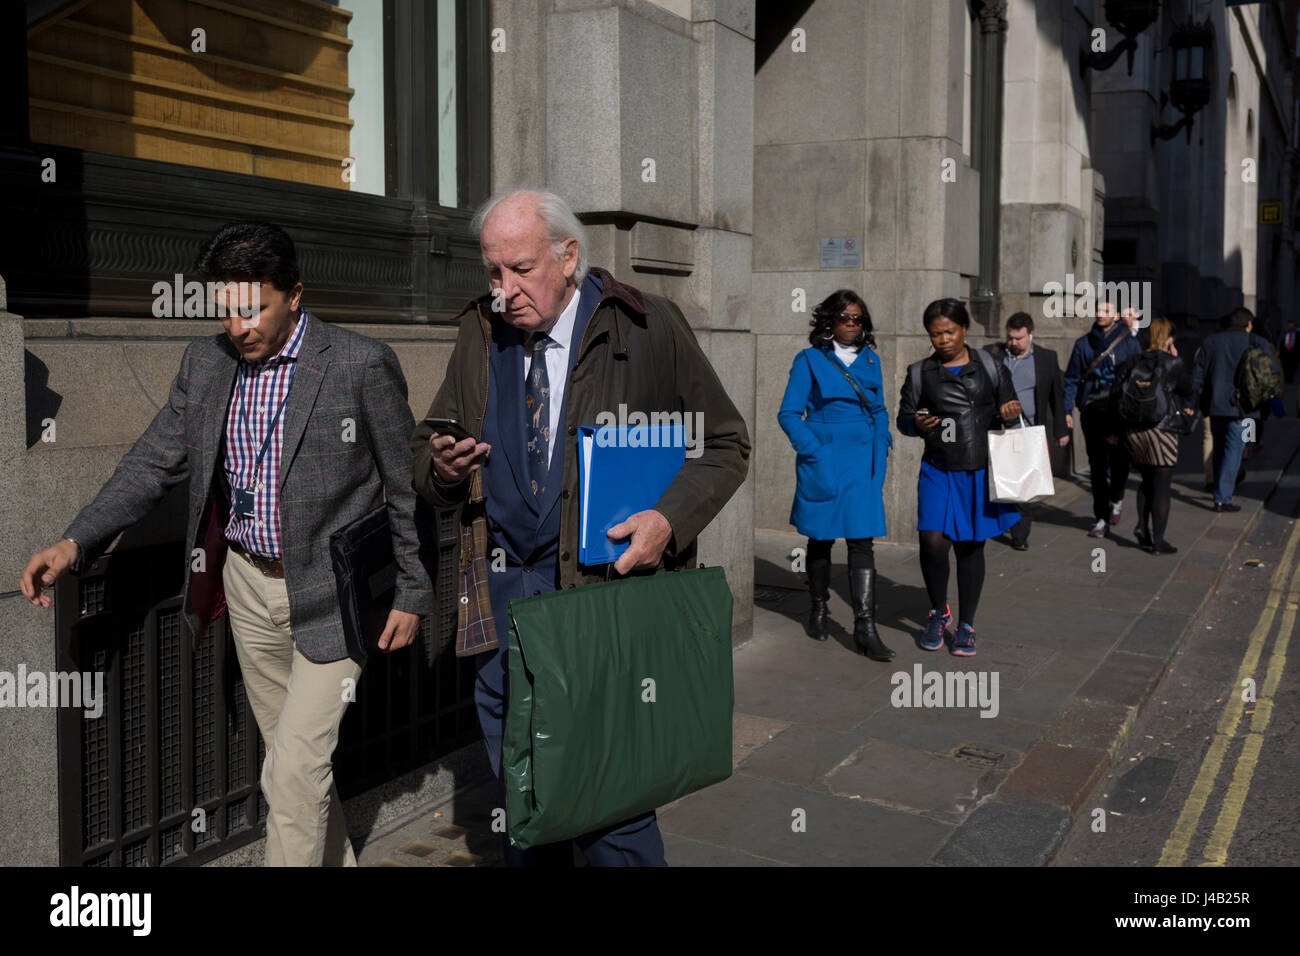 As two women in the background walk in matching blue clothing, an elderly gentleman carries a folder in the same colour, on 10th May 2017, in the City of London, England. Stock Photo